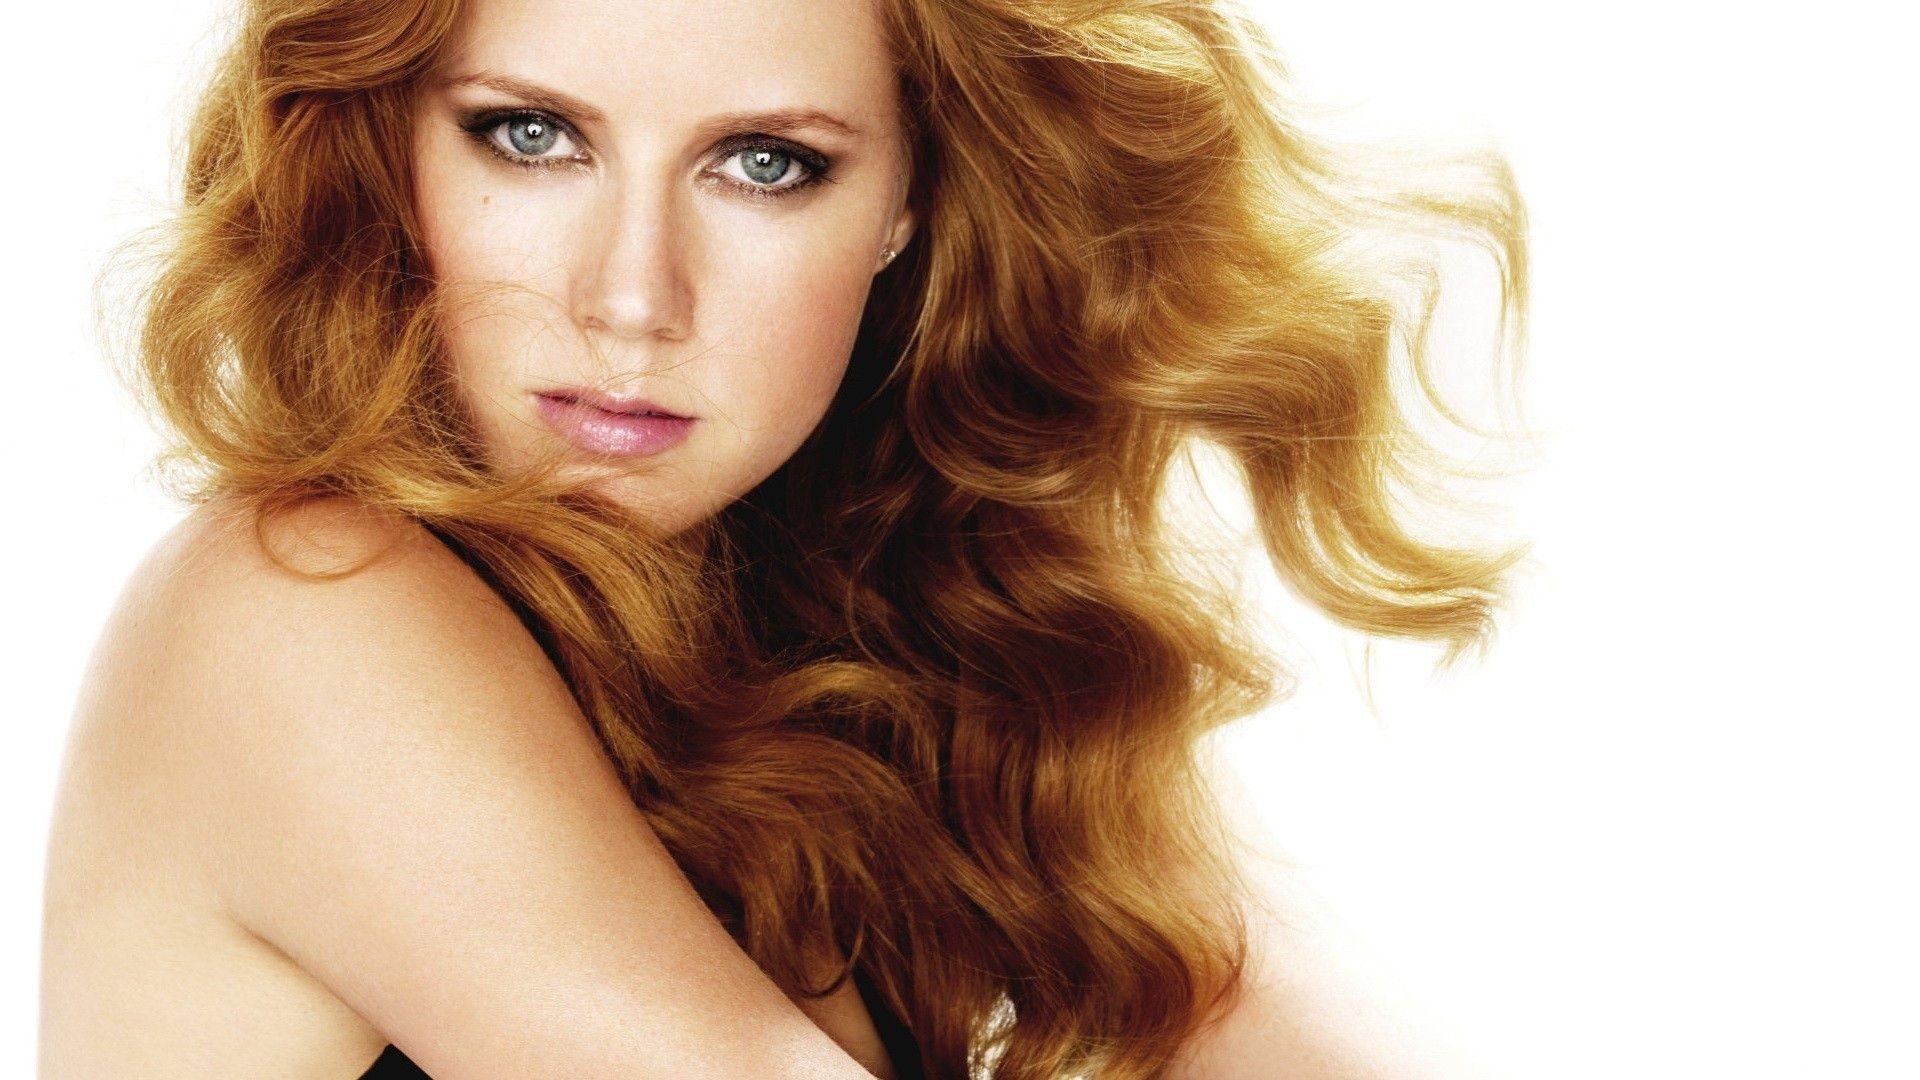 Amy Adams Young Girl Actress my lovely girl wallpaper